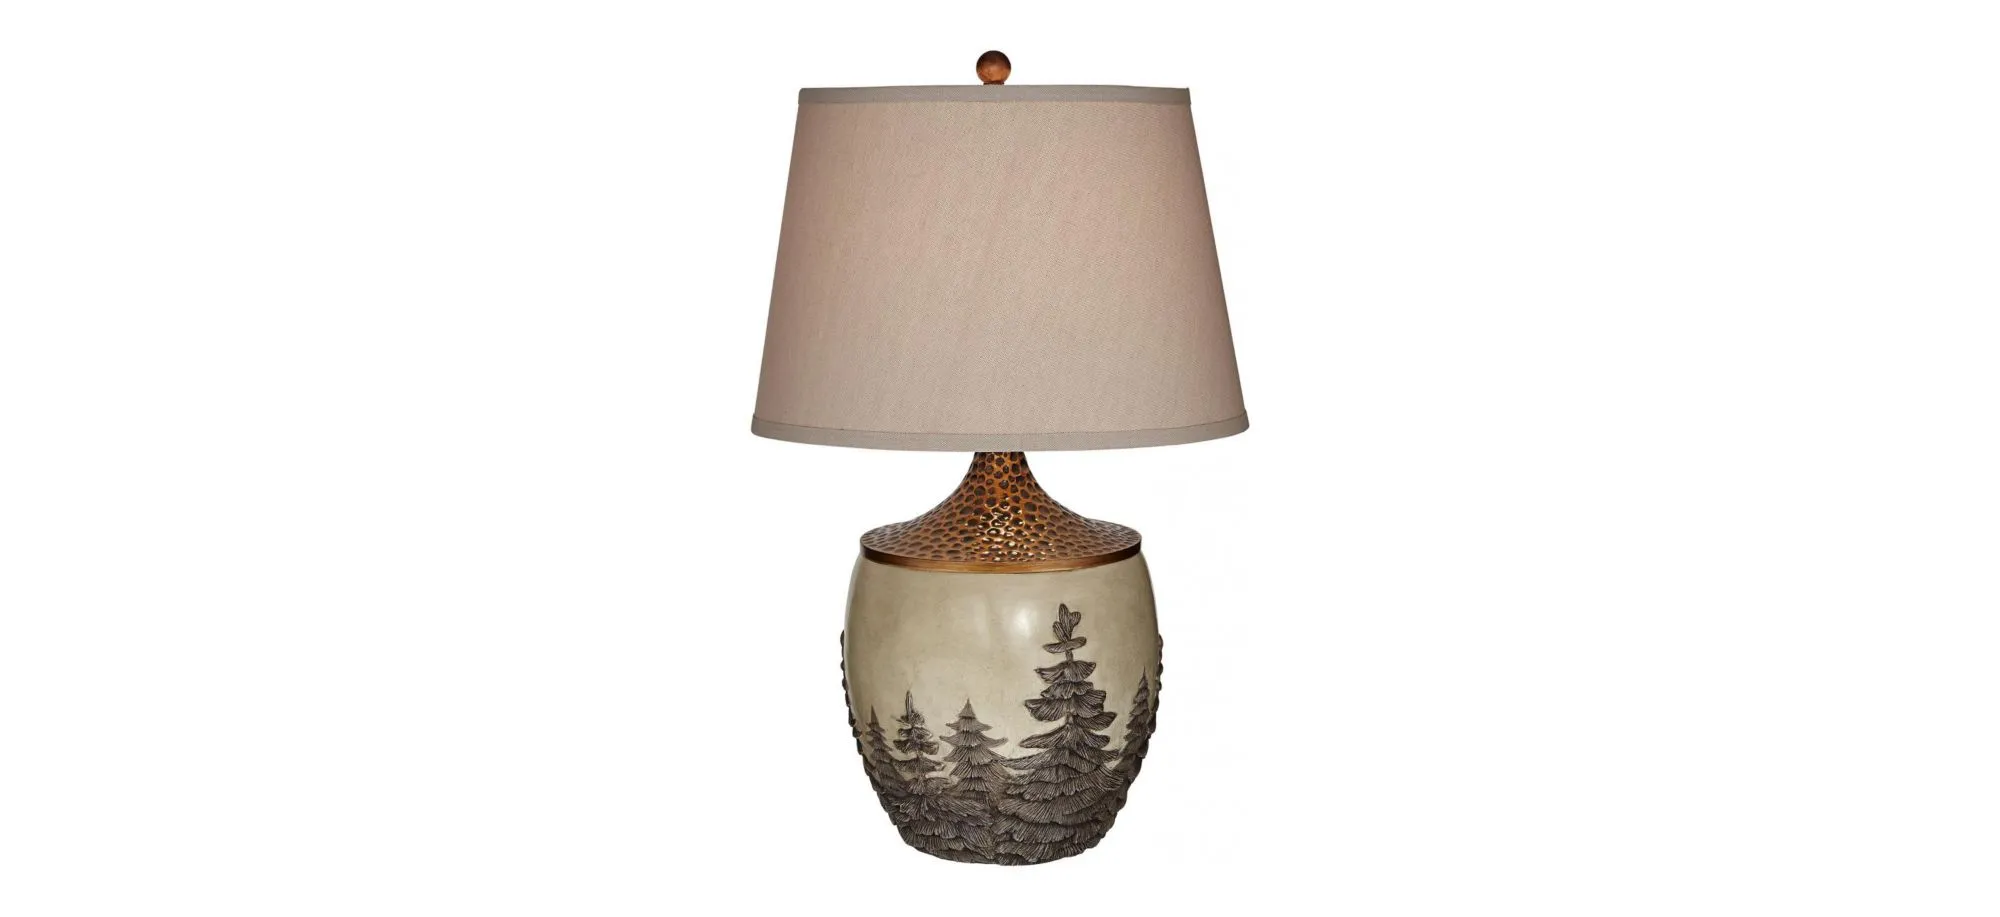 Great Forest Table Lamp in Antique Copper by Pacific Coast